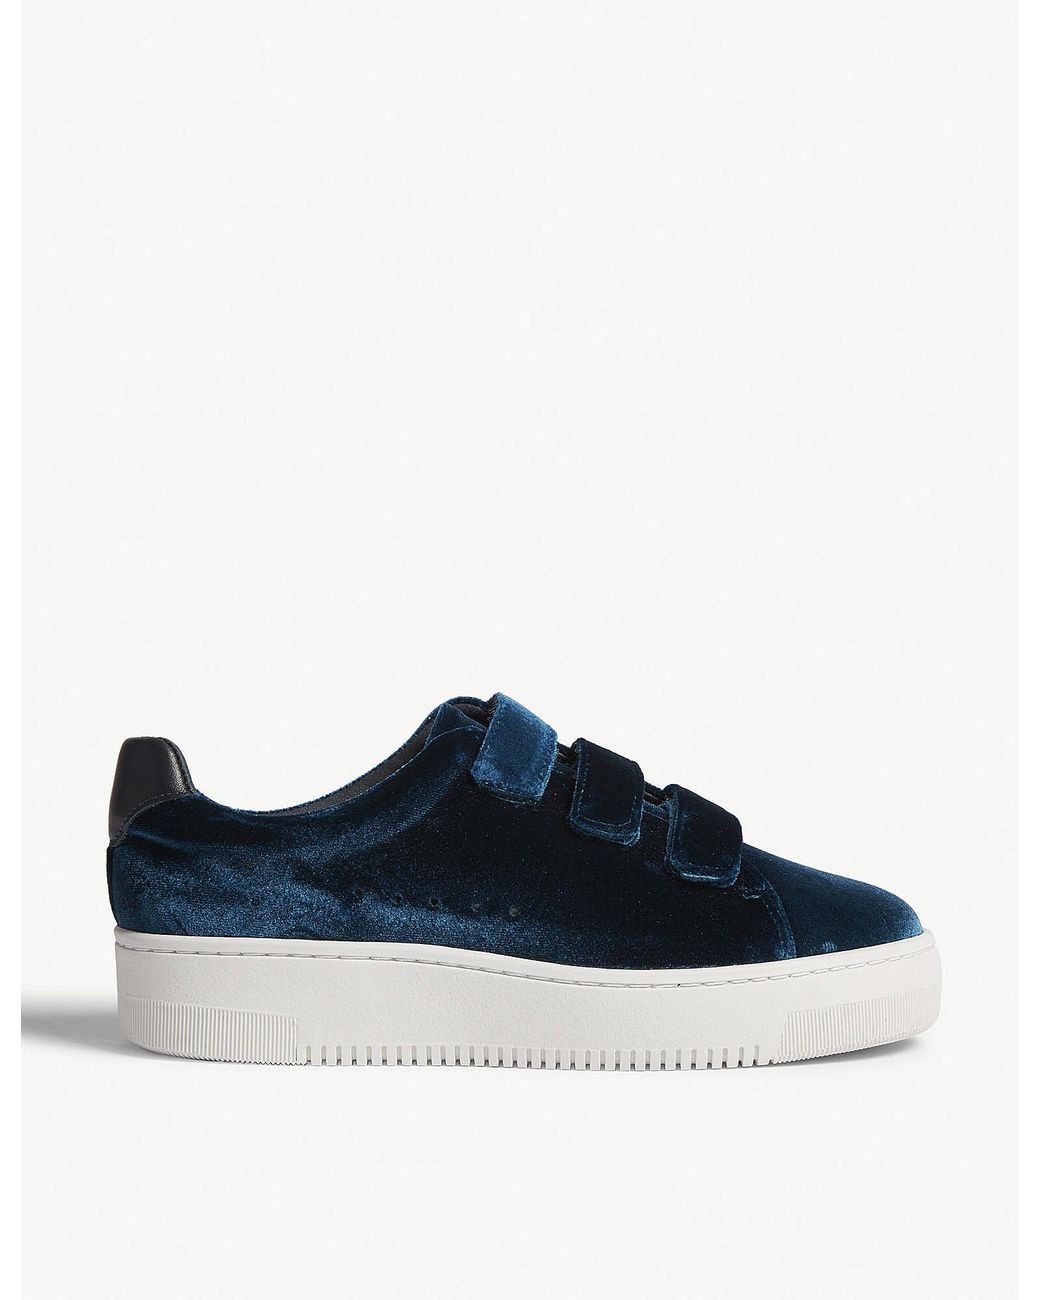 Sandro Velvet Sneakers With Velcro in Turquoise (Blue) | Lyst Canada